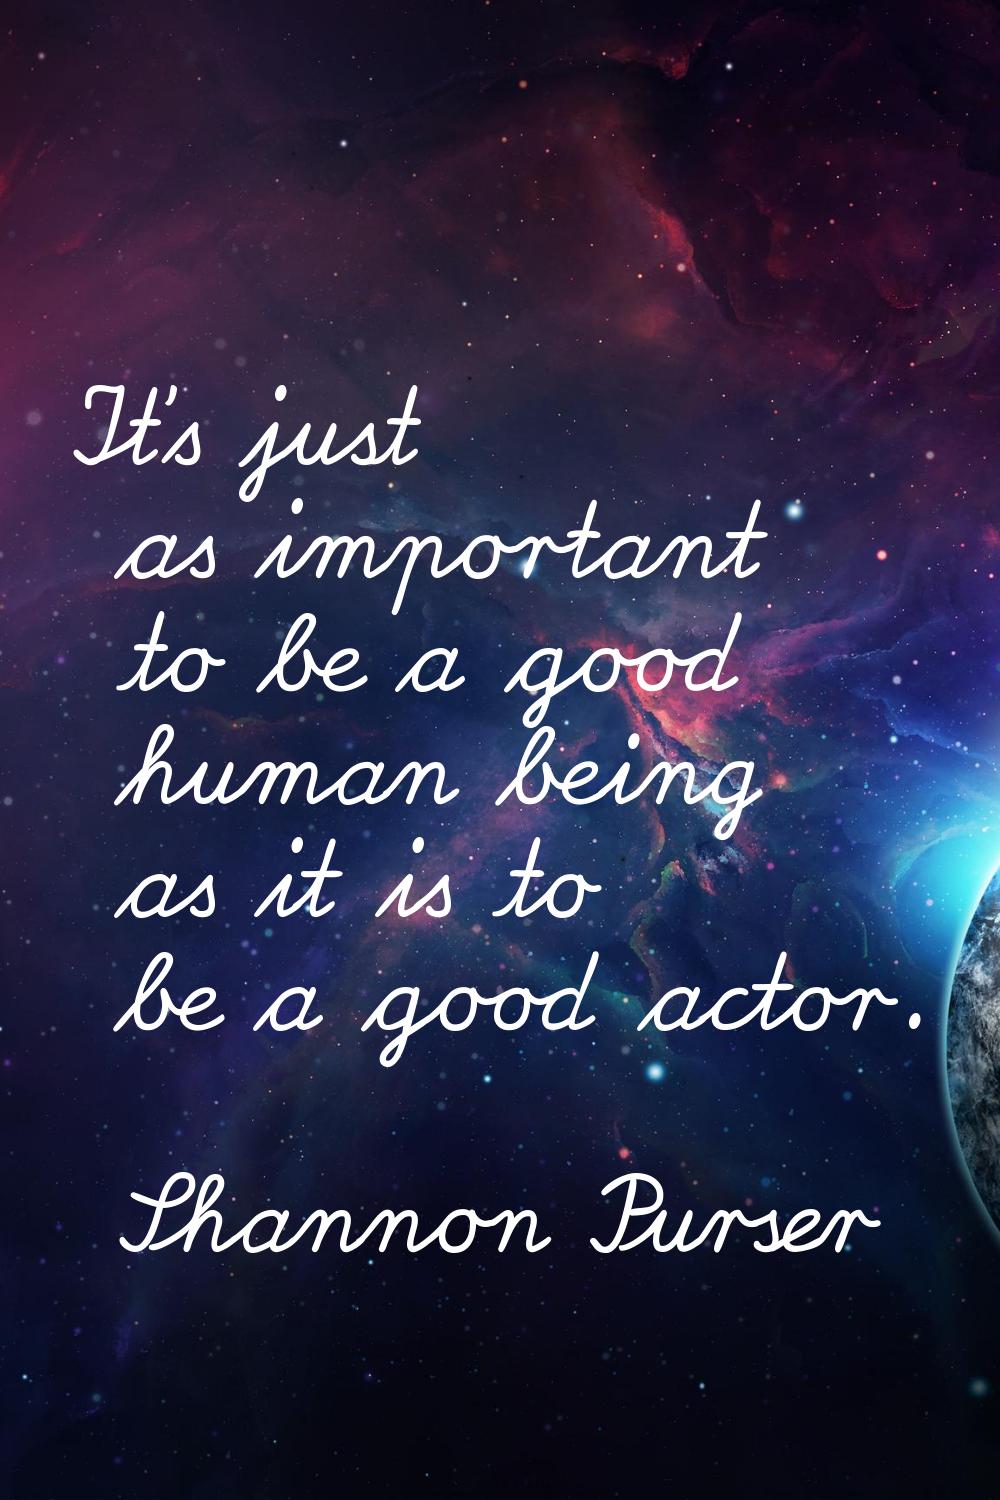 It's just as important to be a good human being as it is to be a good actor.